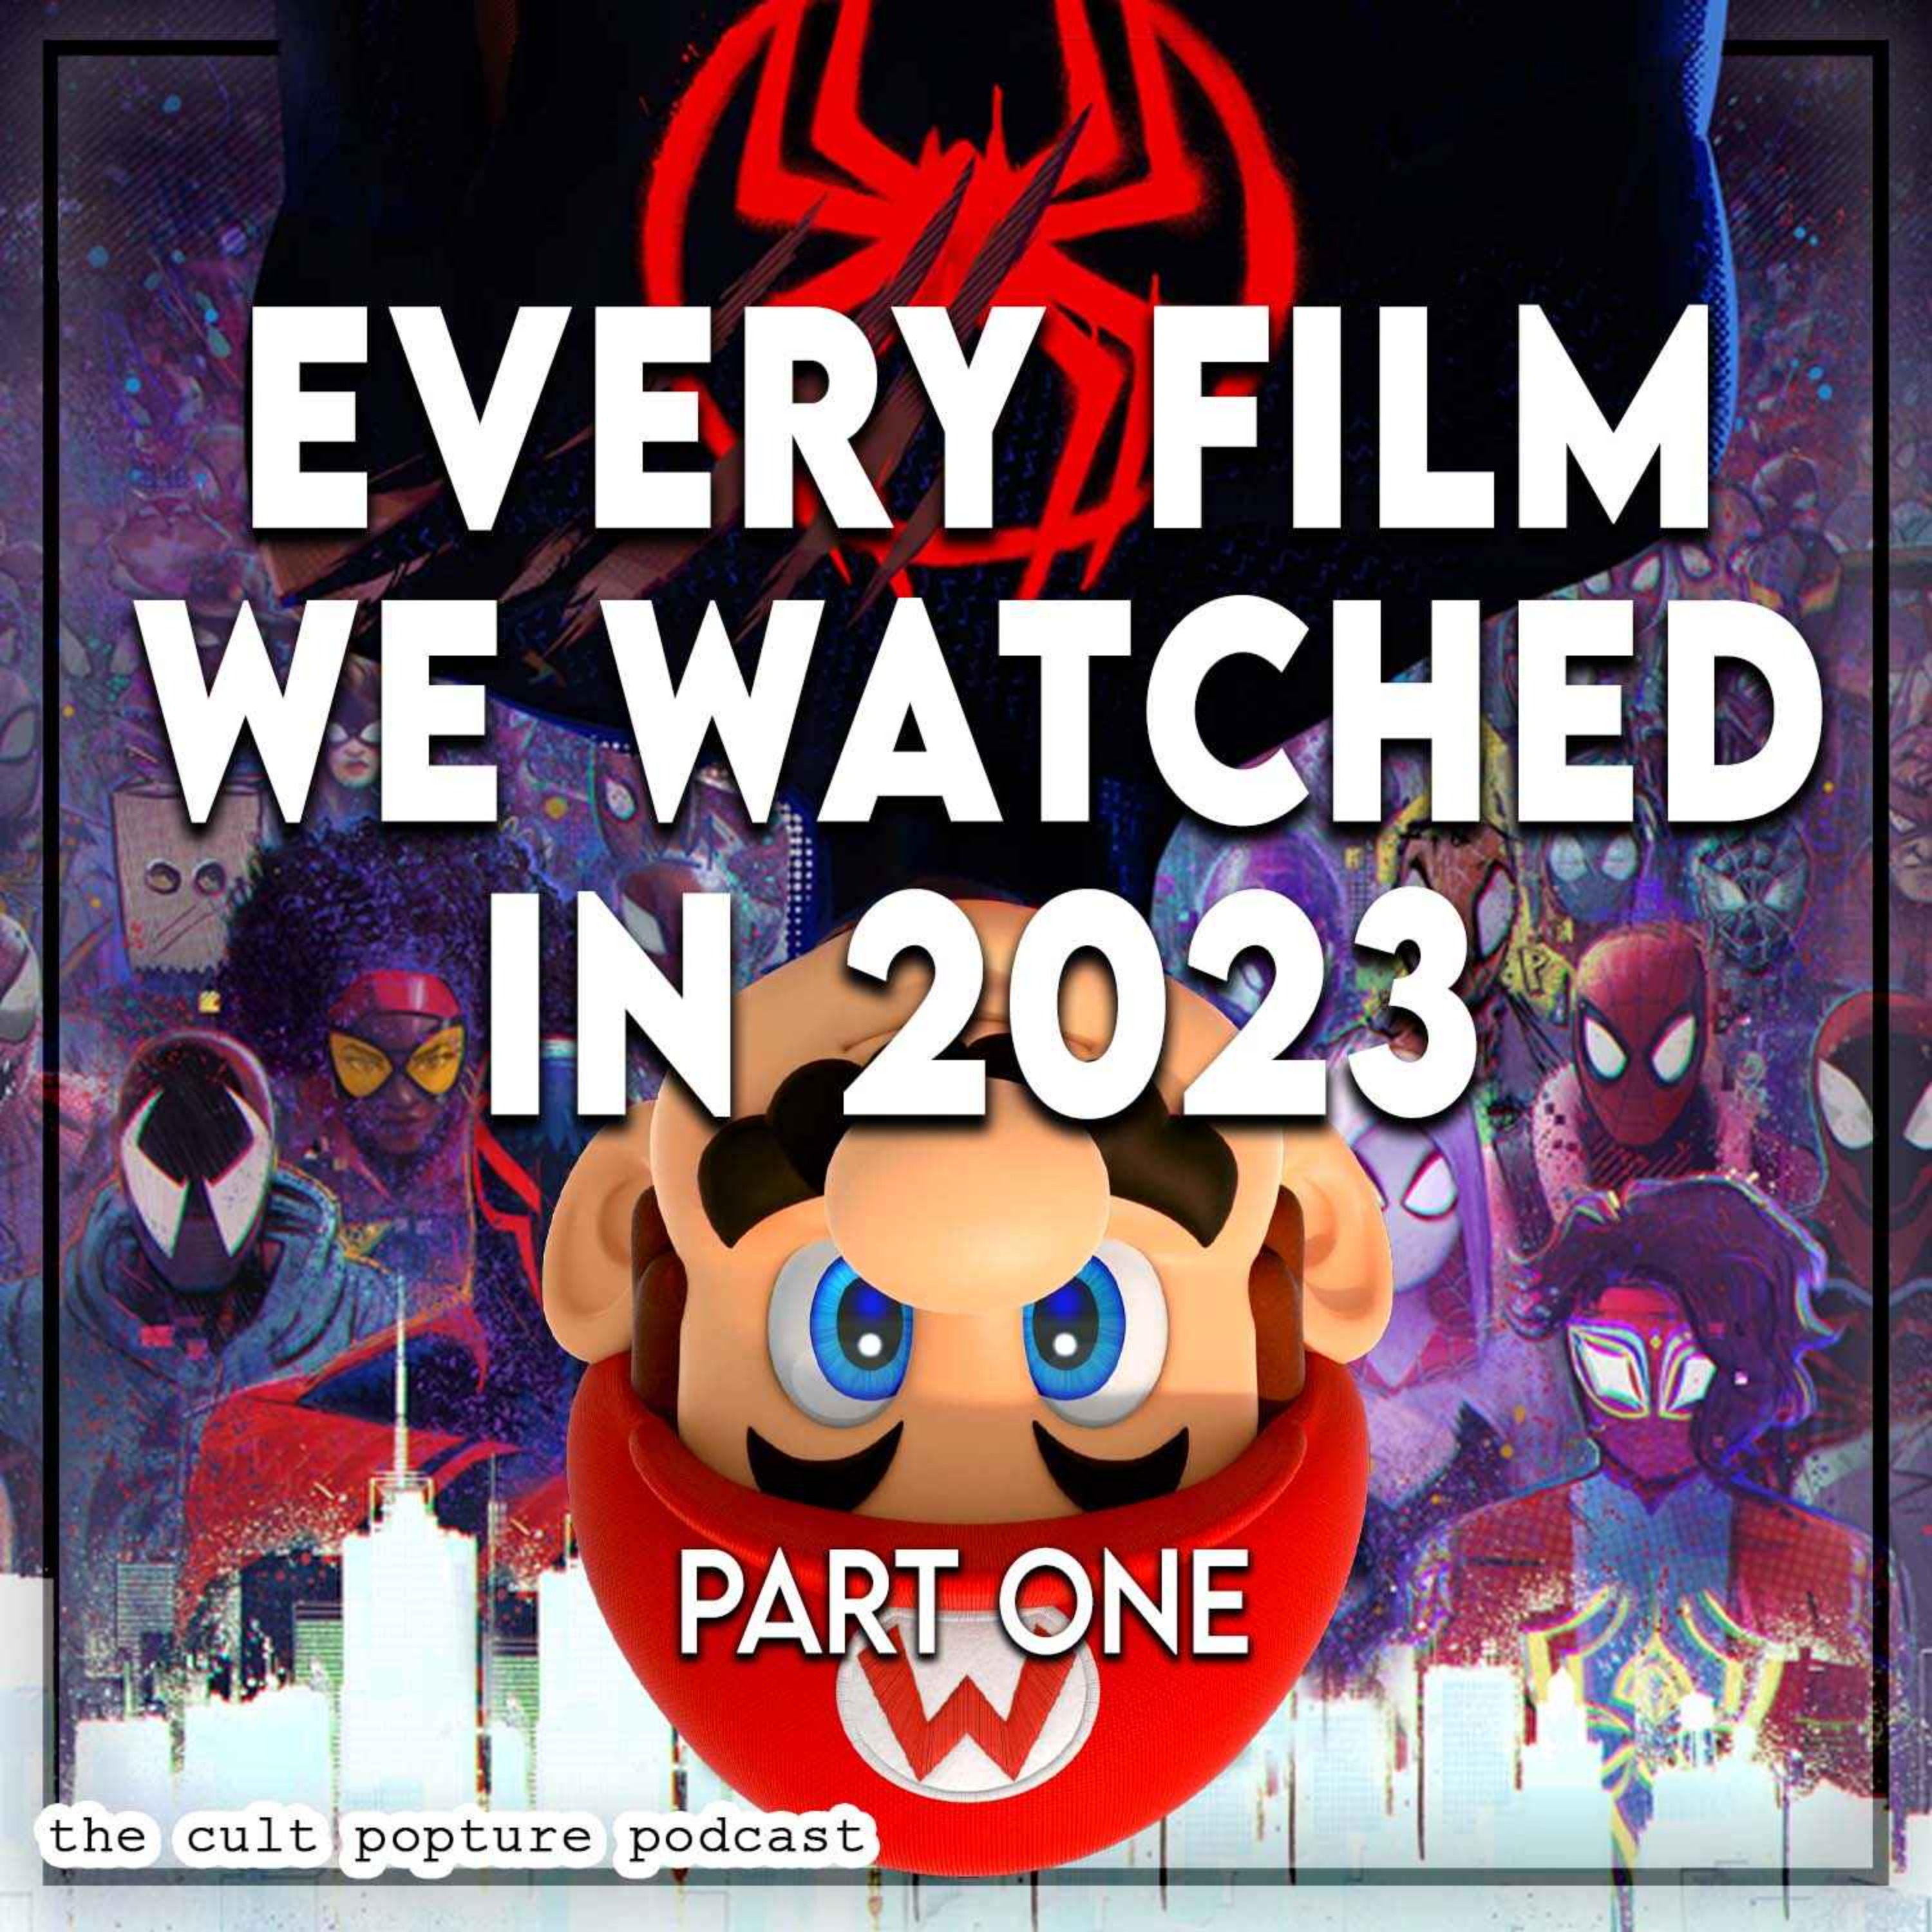 Every Film We Watched in 2023 (Part One) | The Cult Popture Podcast